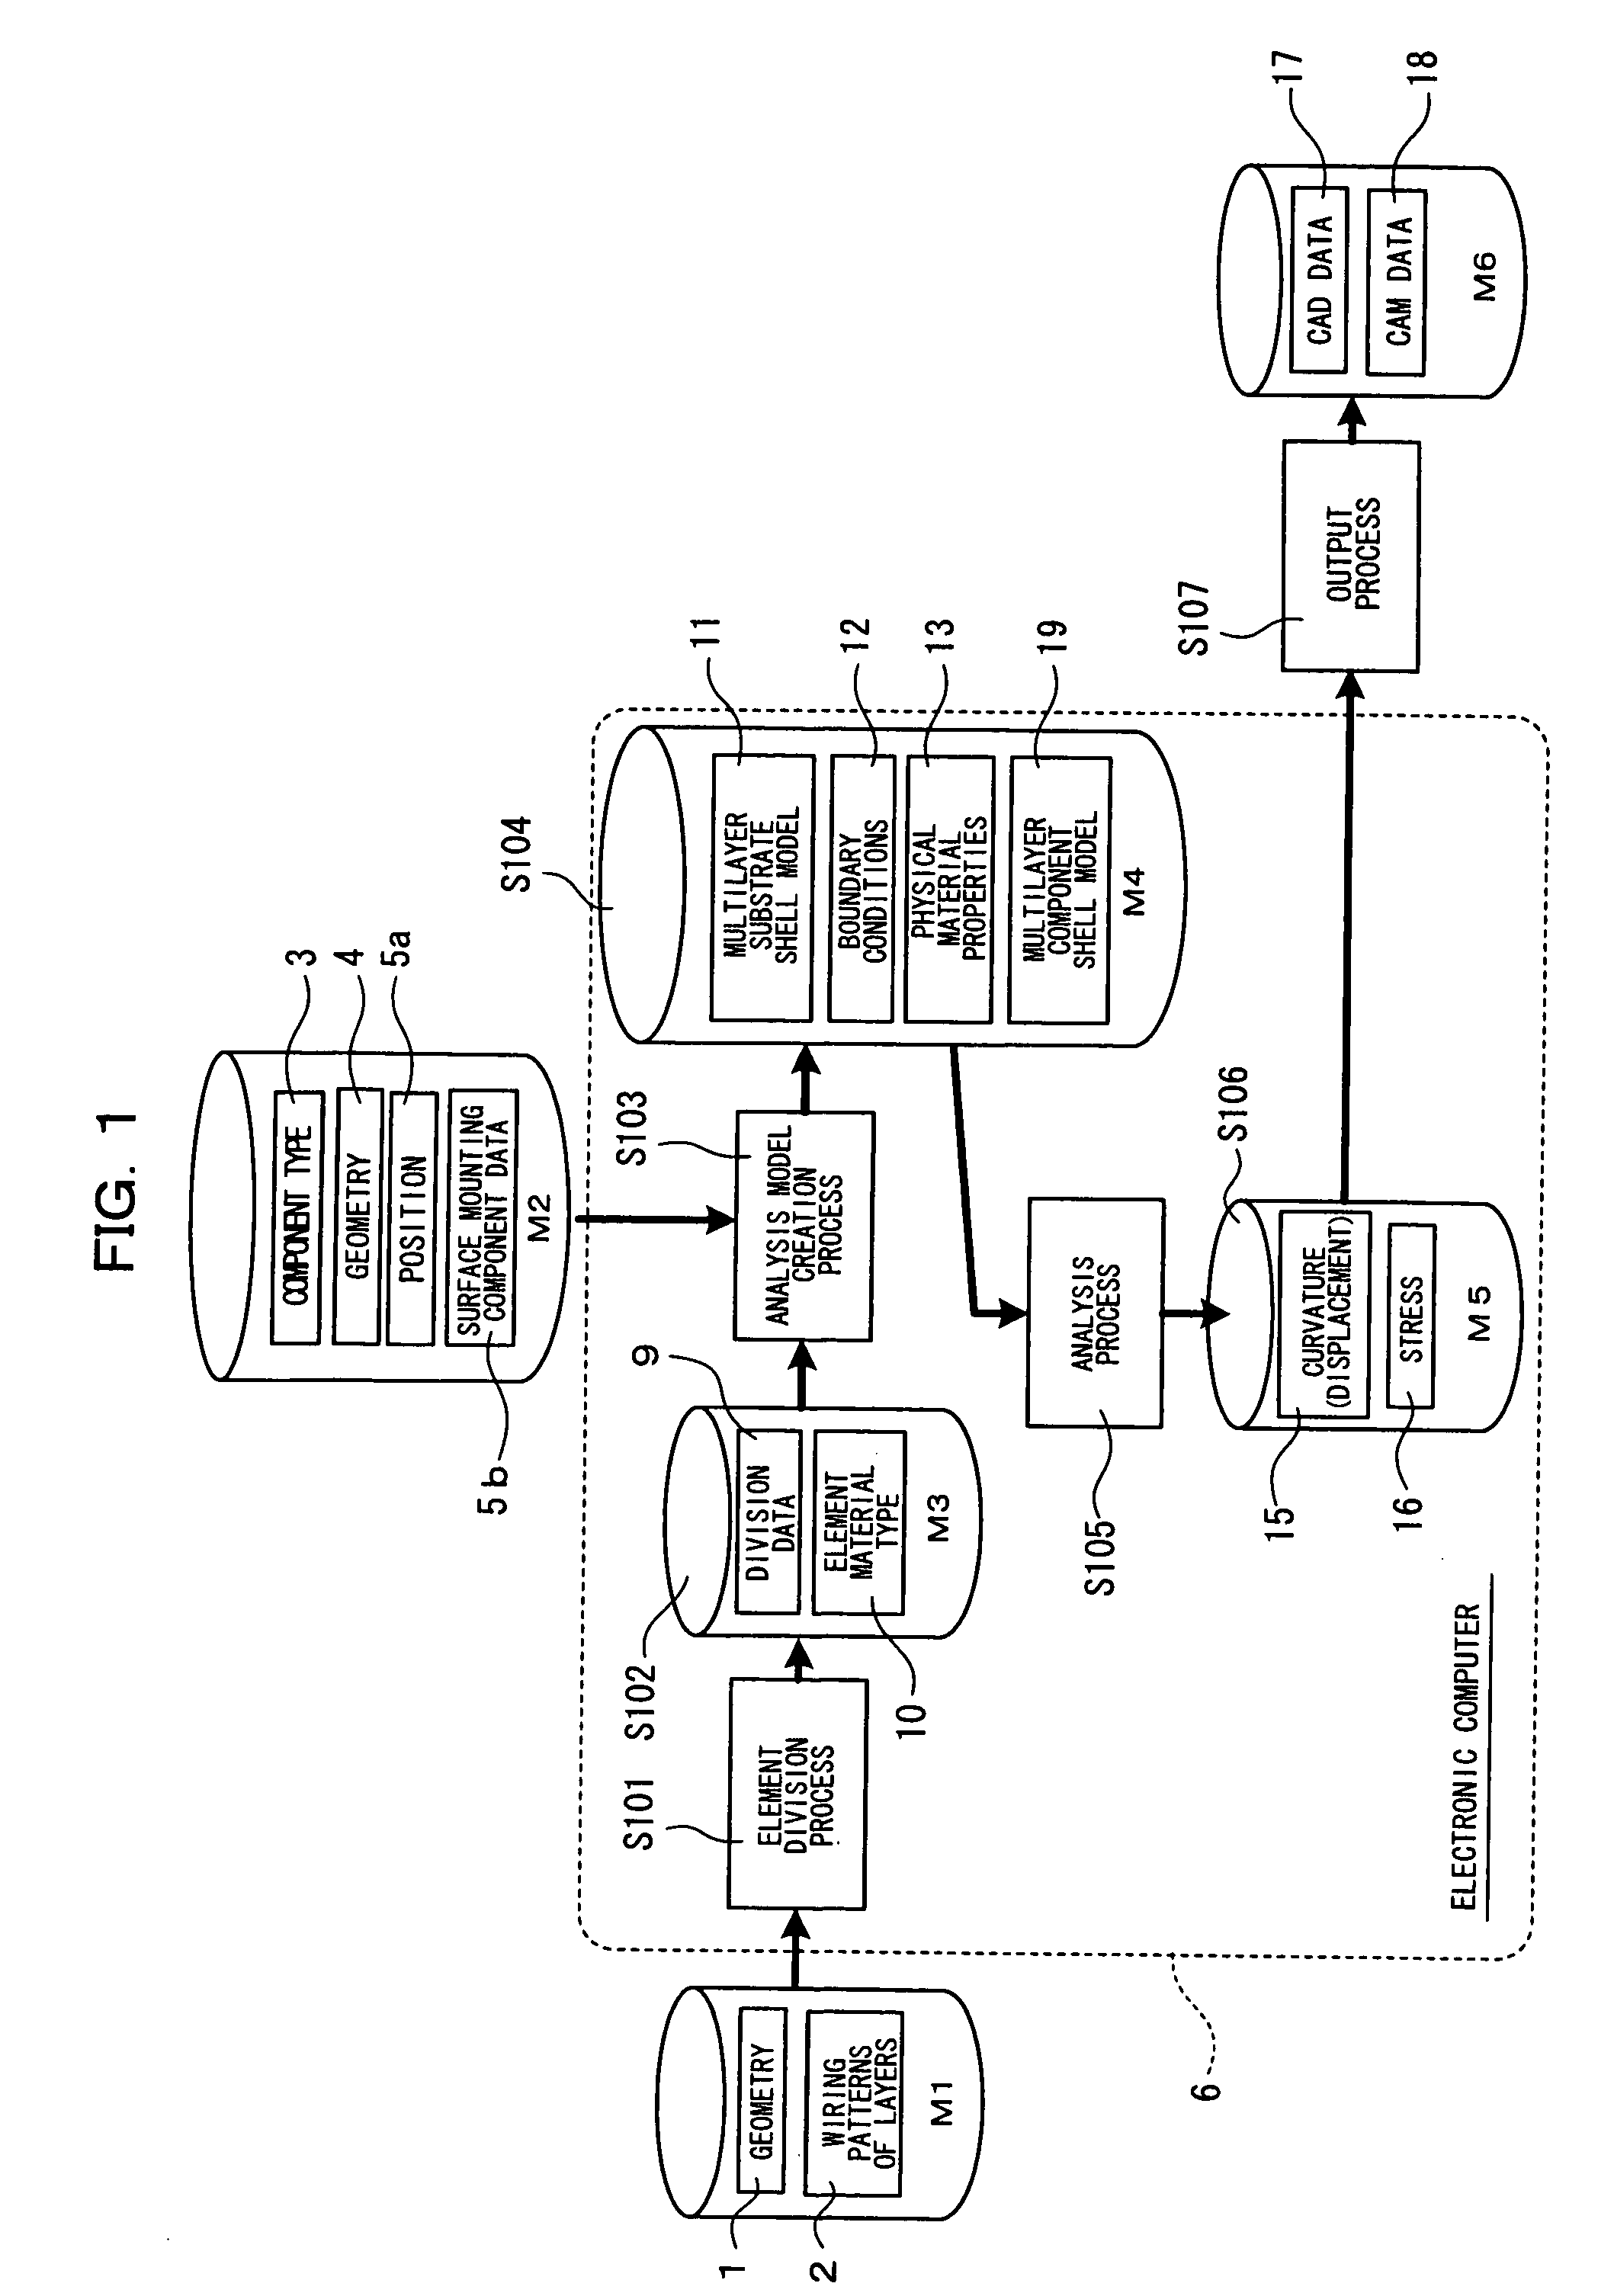 Method for Analyzing Component Mounting Board